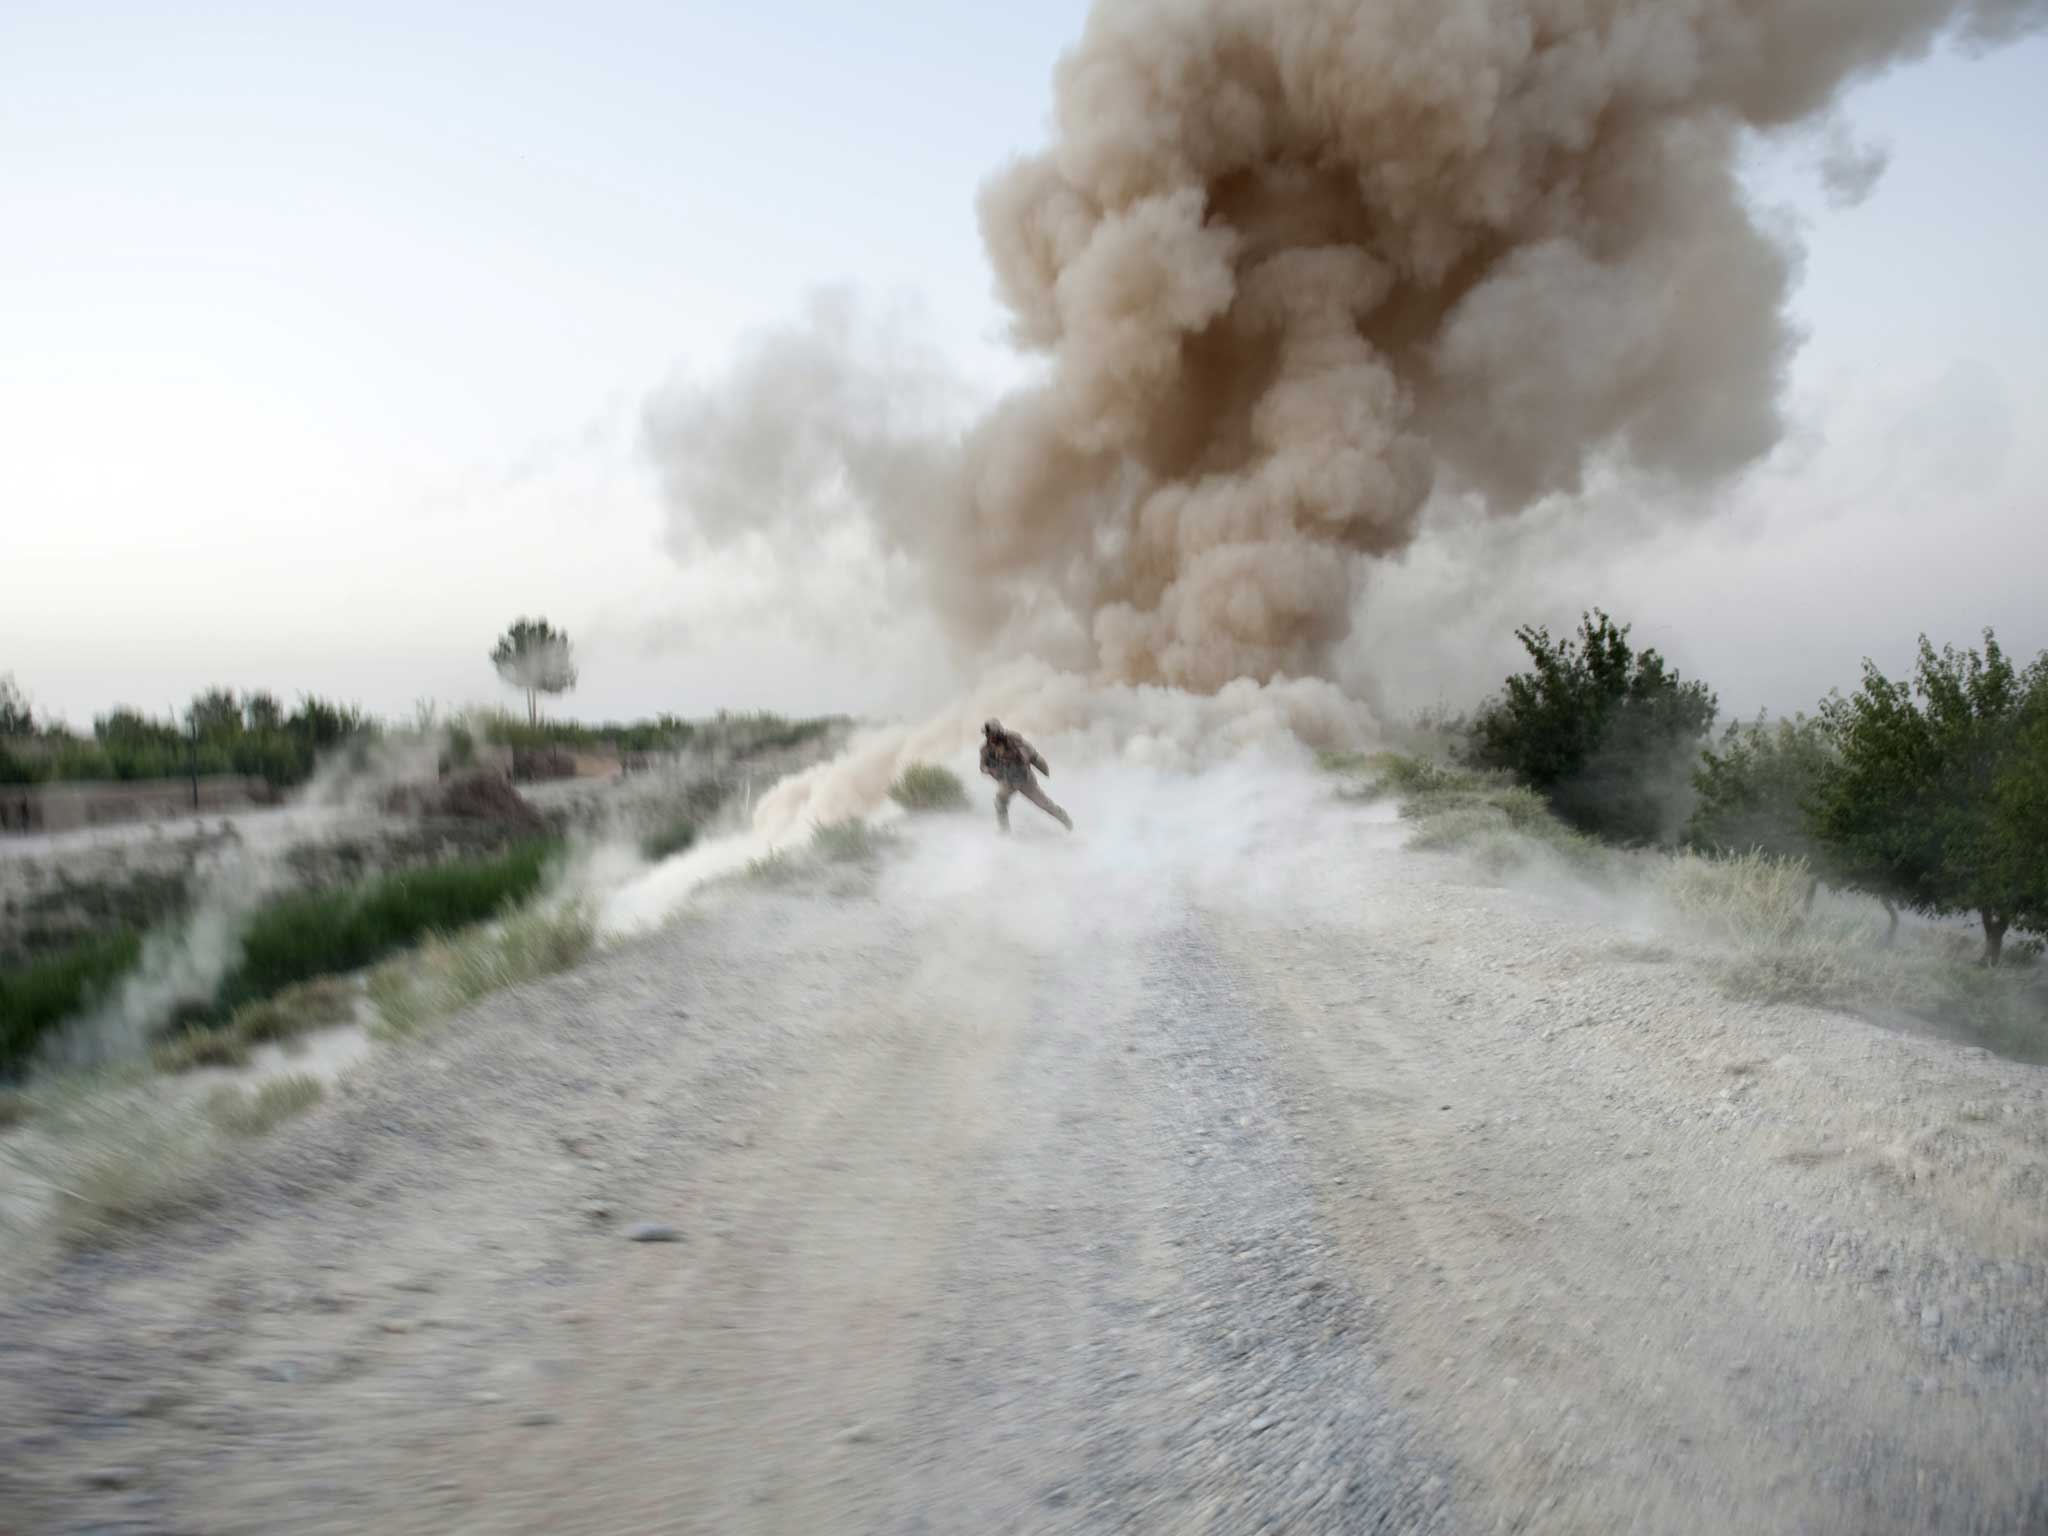 An IED explodes in Helmand province where the offence is alleged to have taken place two years ago